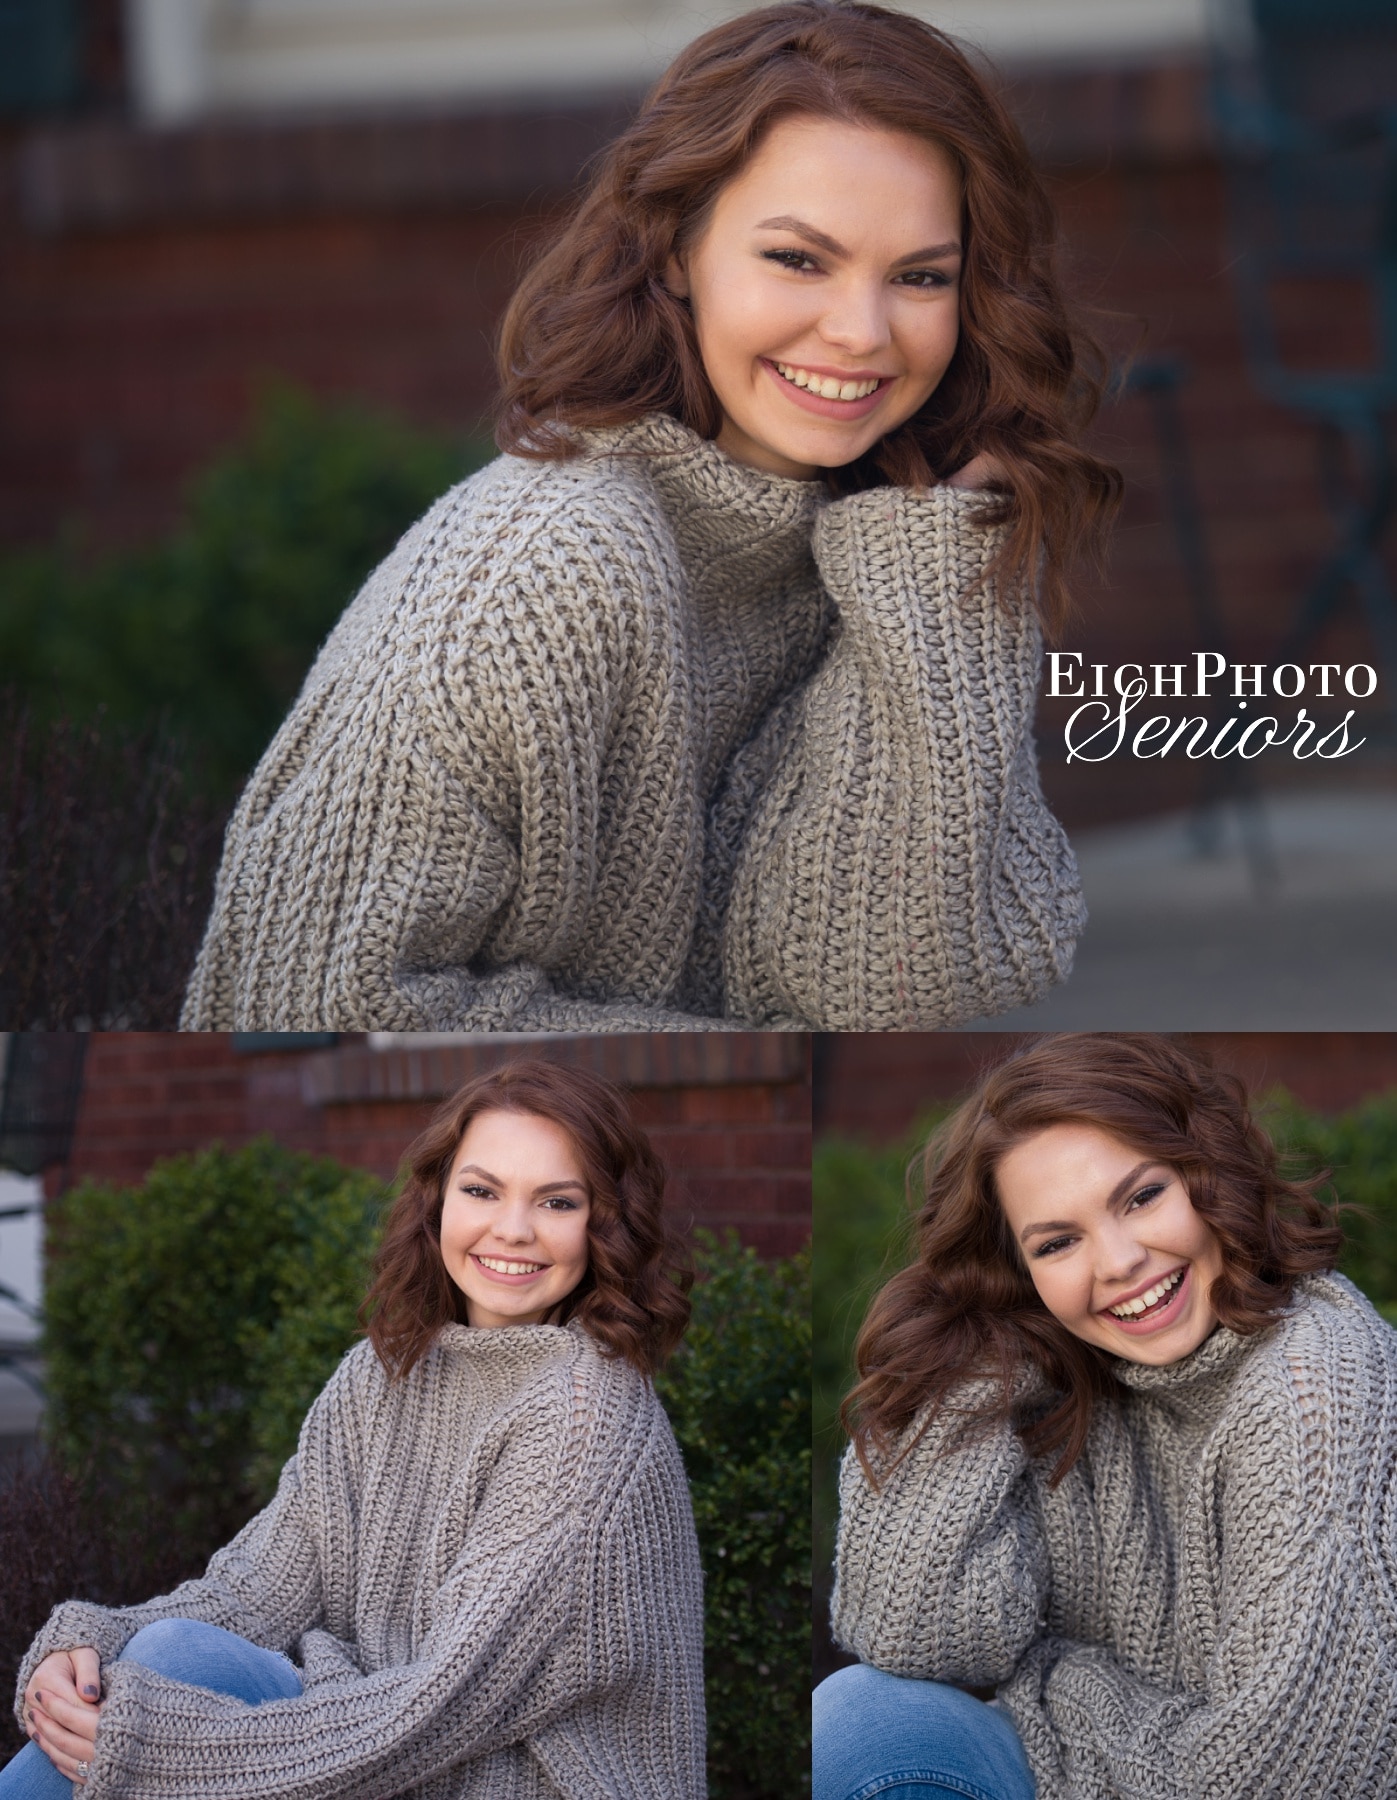 Webster Groves High School student backyard Senior Pictures. wavy red brown hair, oversized sweater, parents' front porch, giggling laughing smiling 